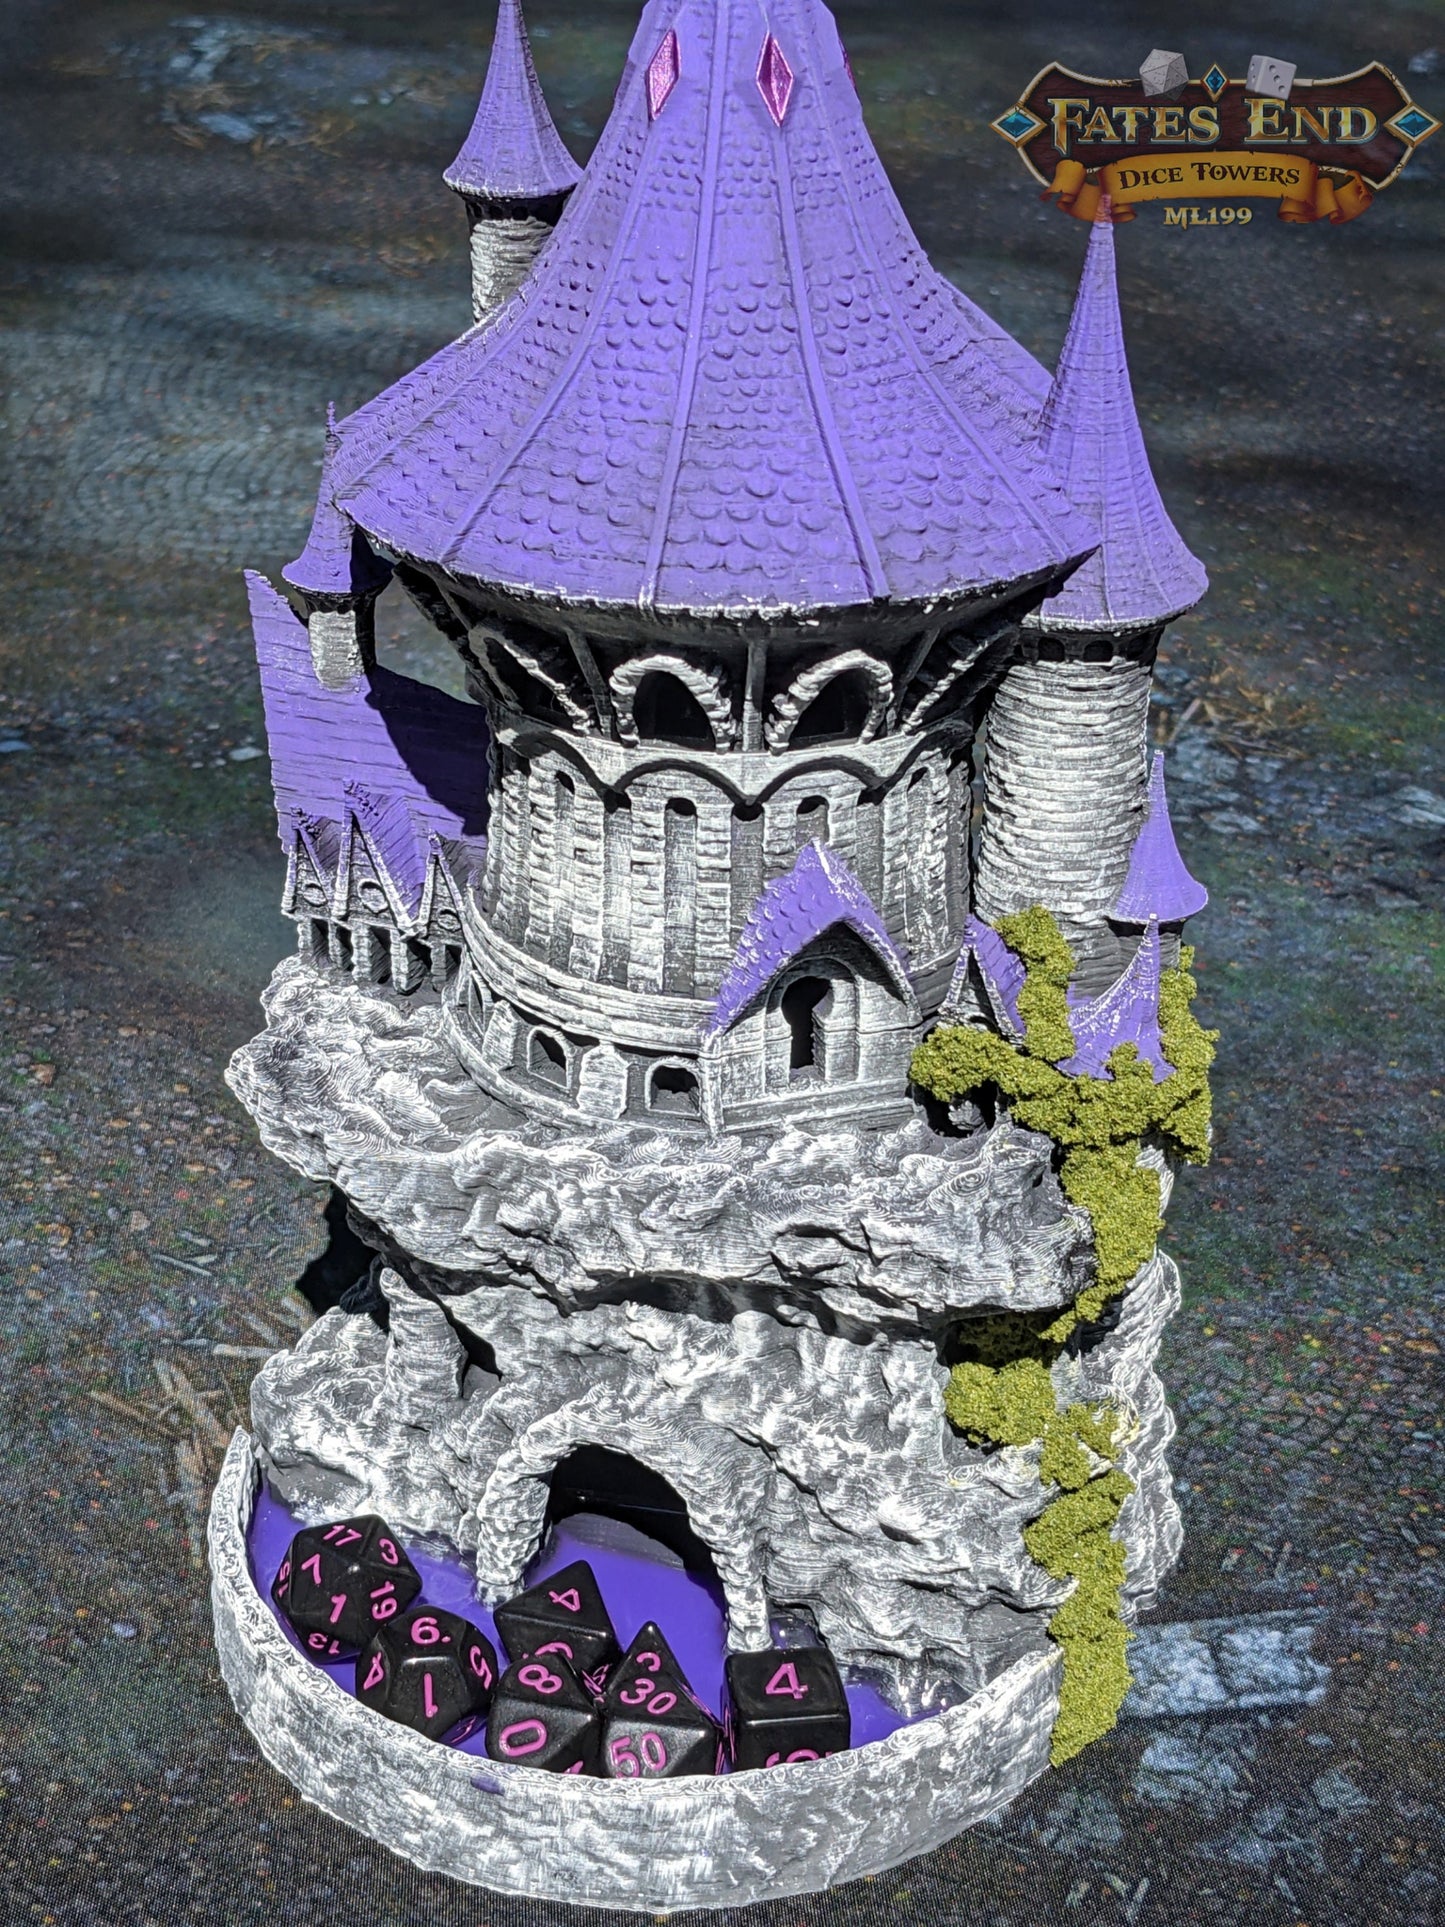 Sorcerer Class 3D Printed Dice Tower - Fate's End Collection - Tabletop RPG Gaming Fantasy Cosplay - Step into the realm of arcane energies.